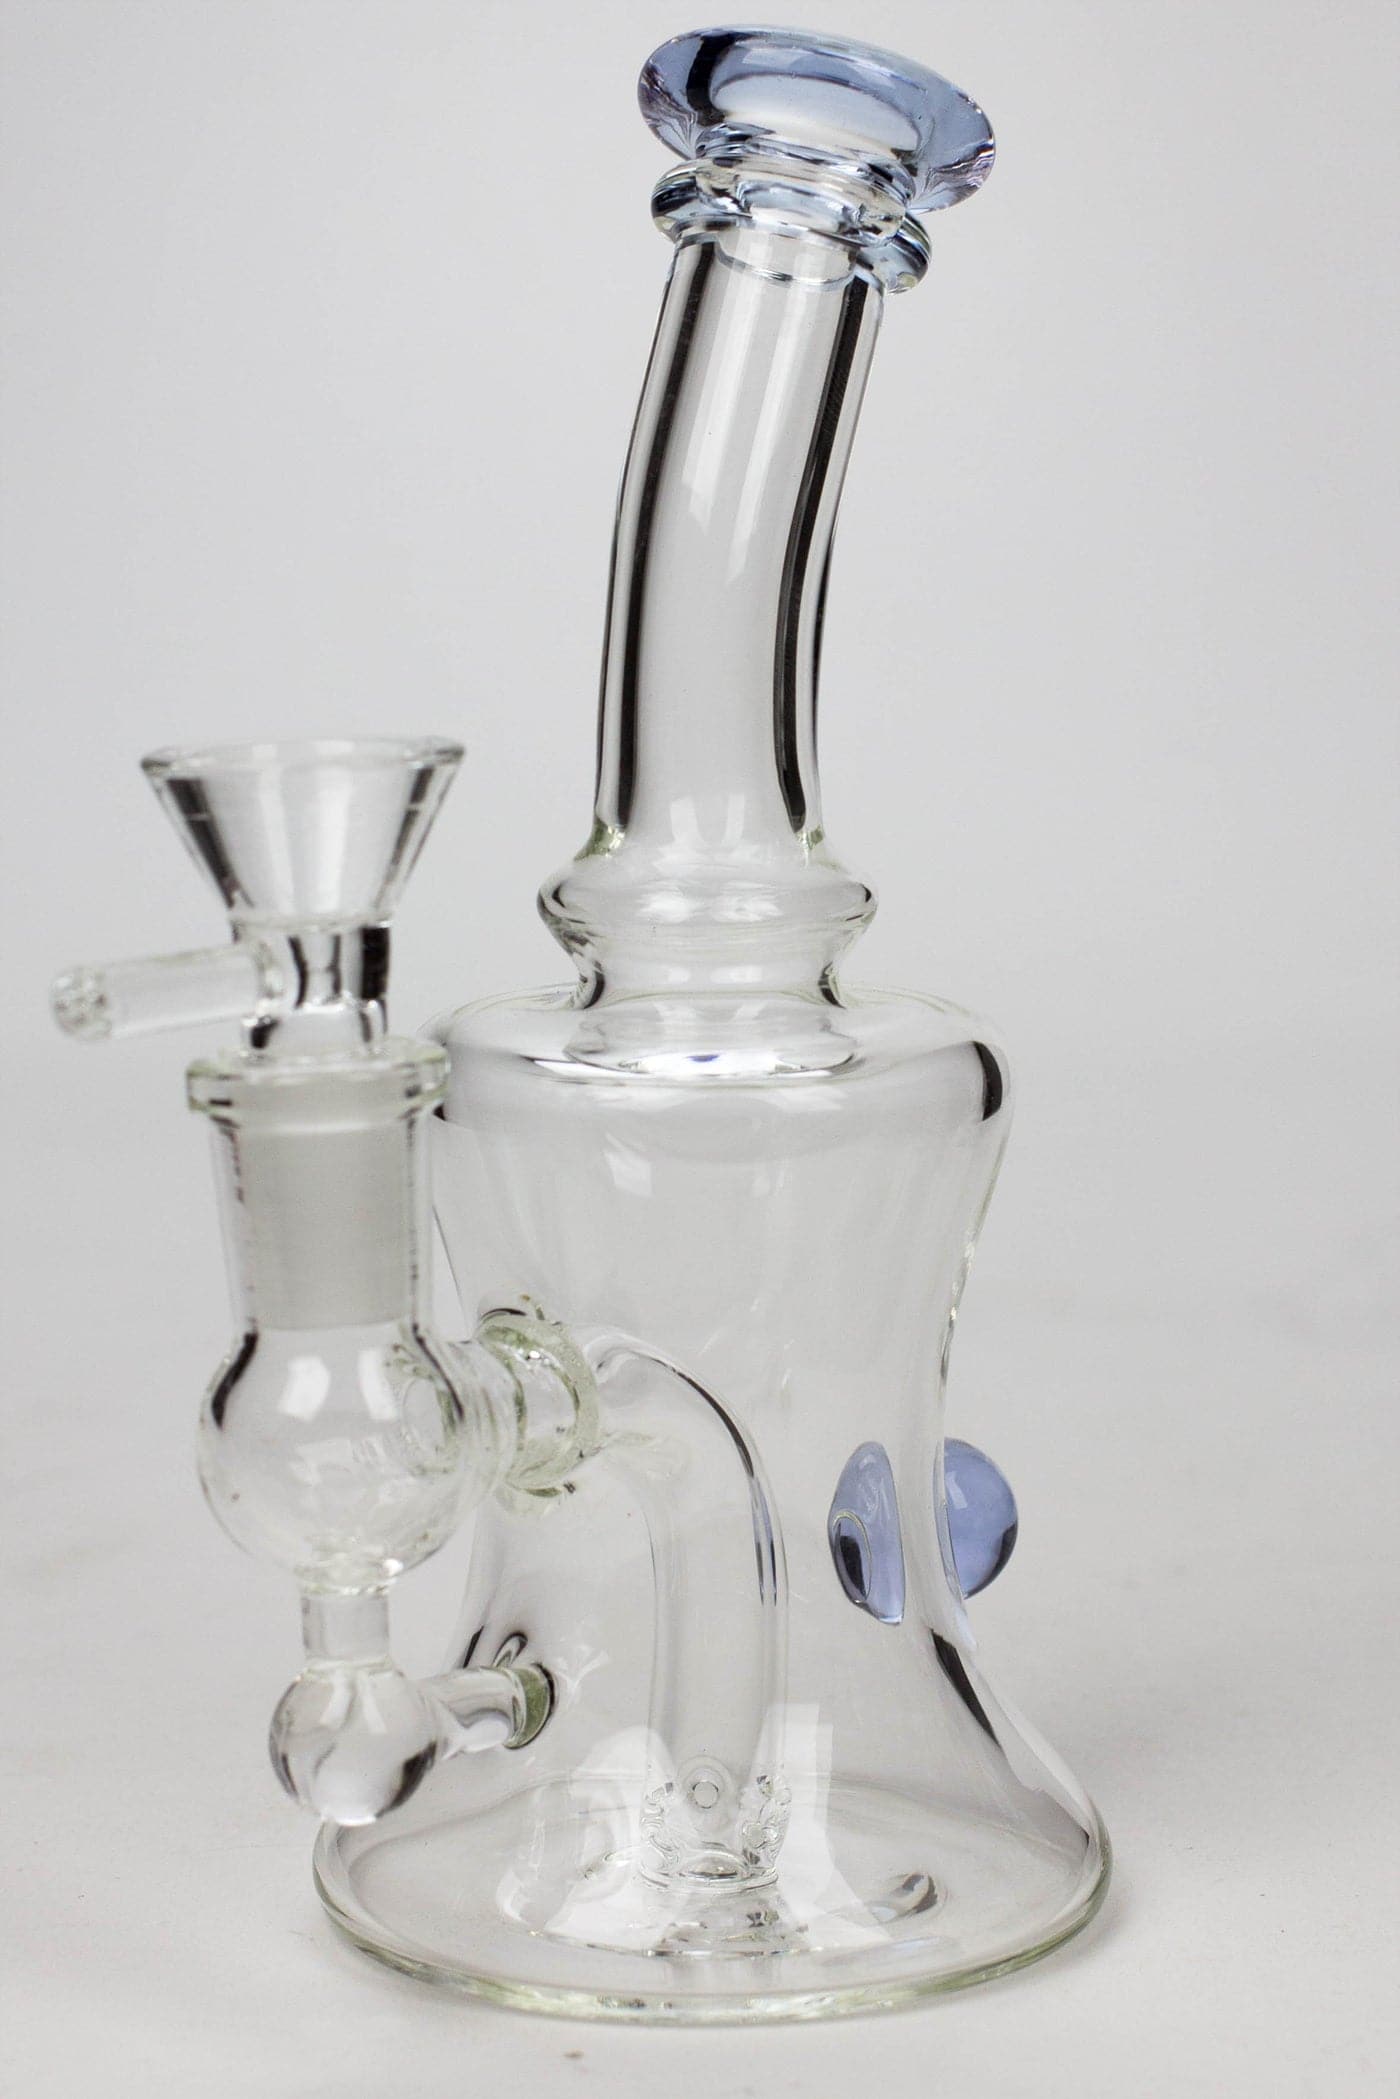 Fixed 3 hole diffuser skirt bubbler_10